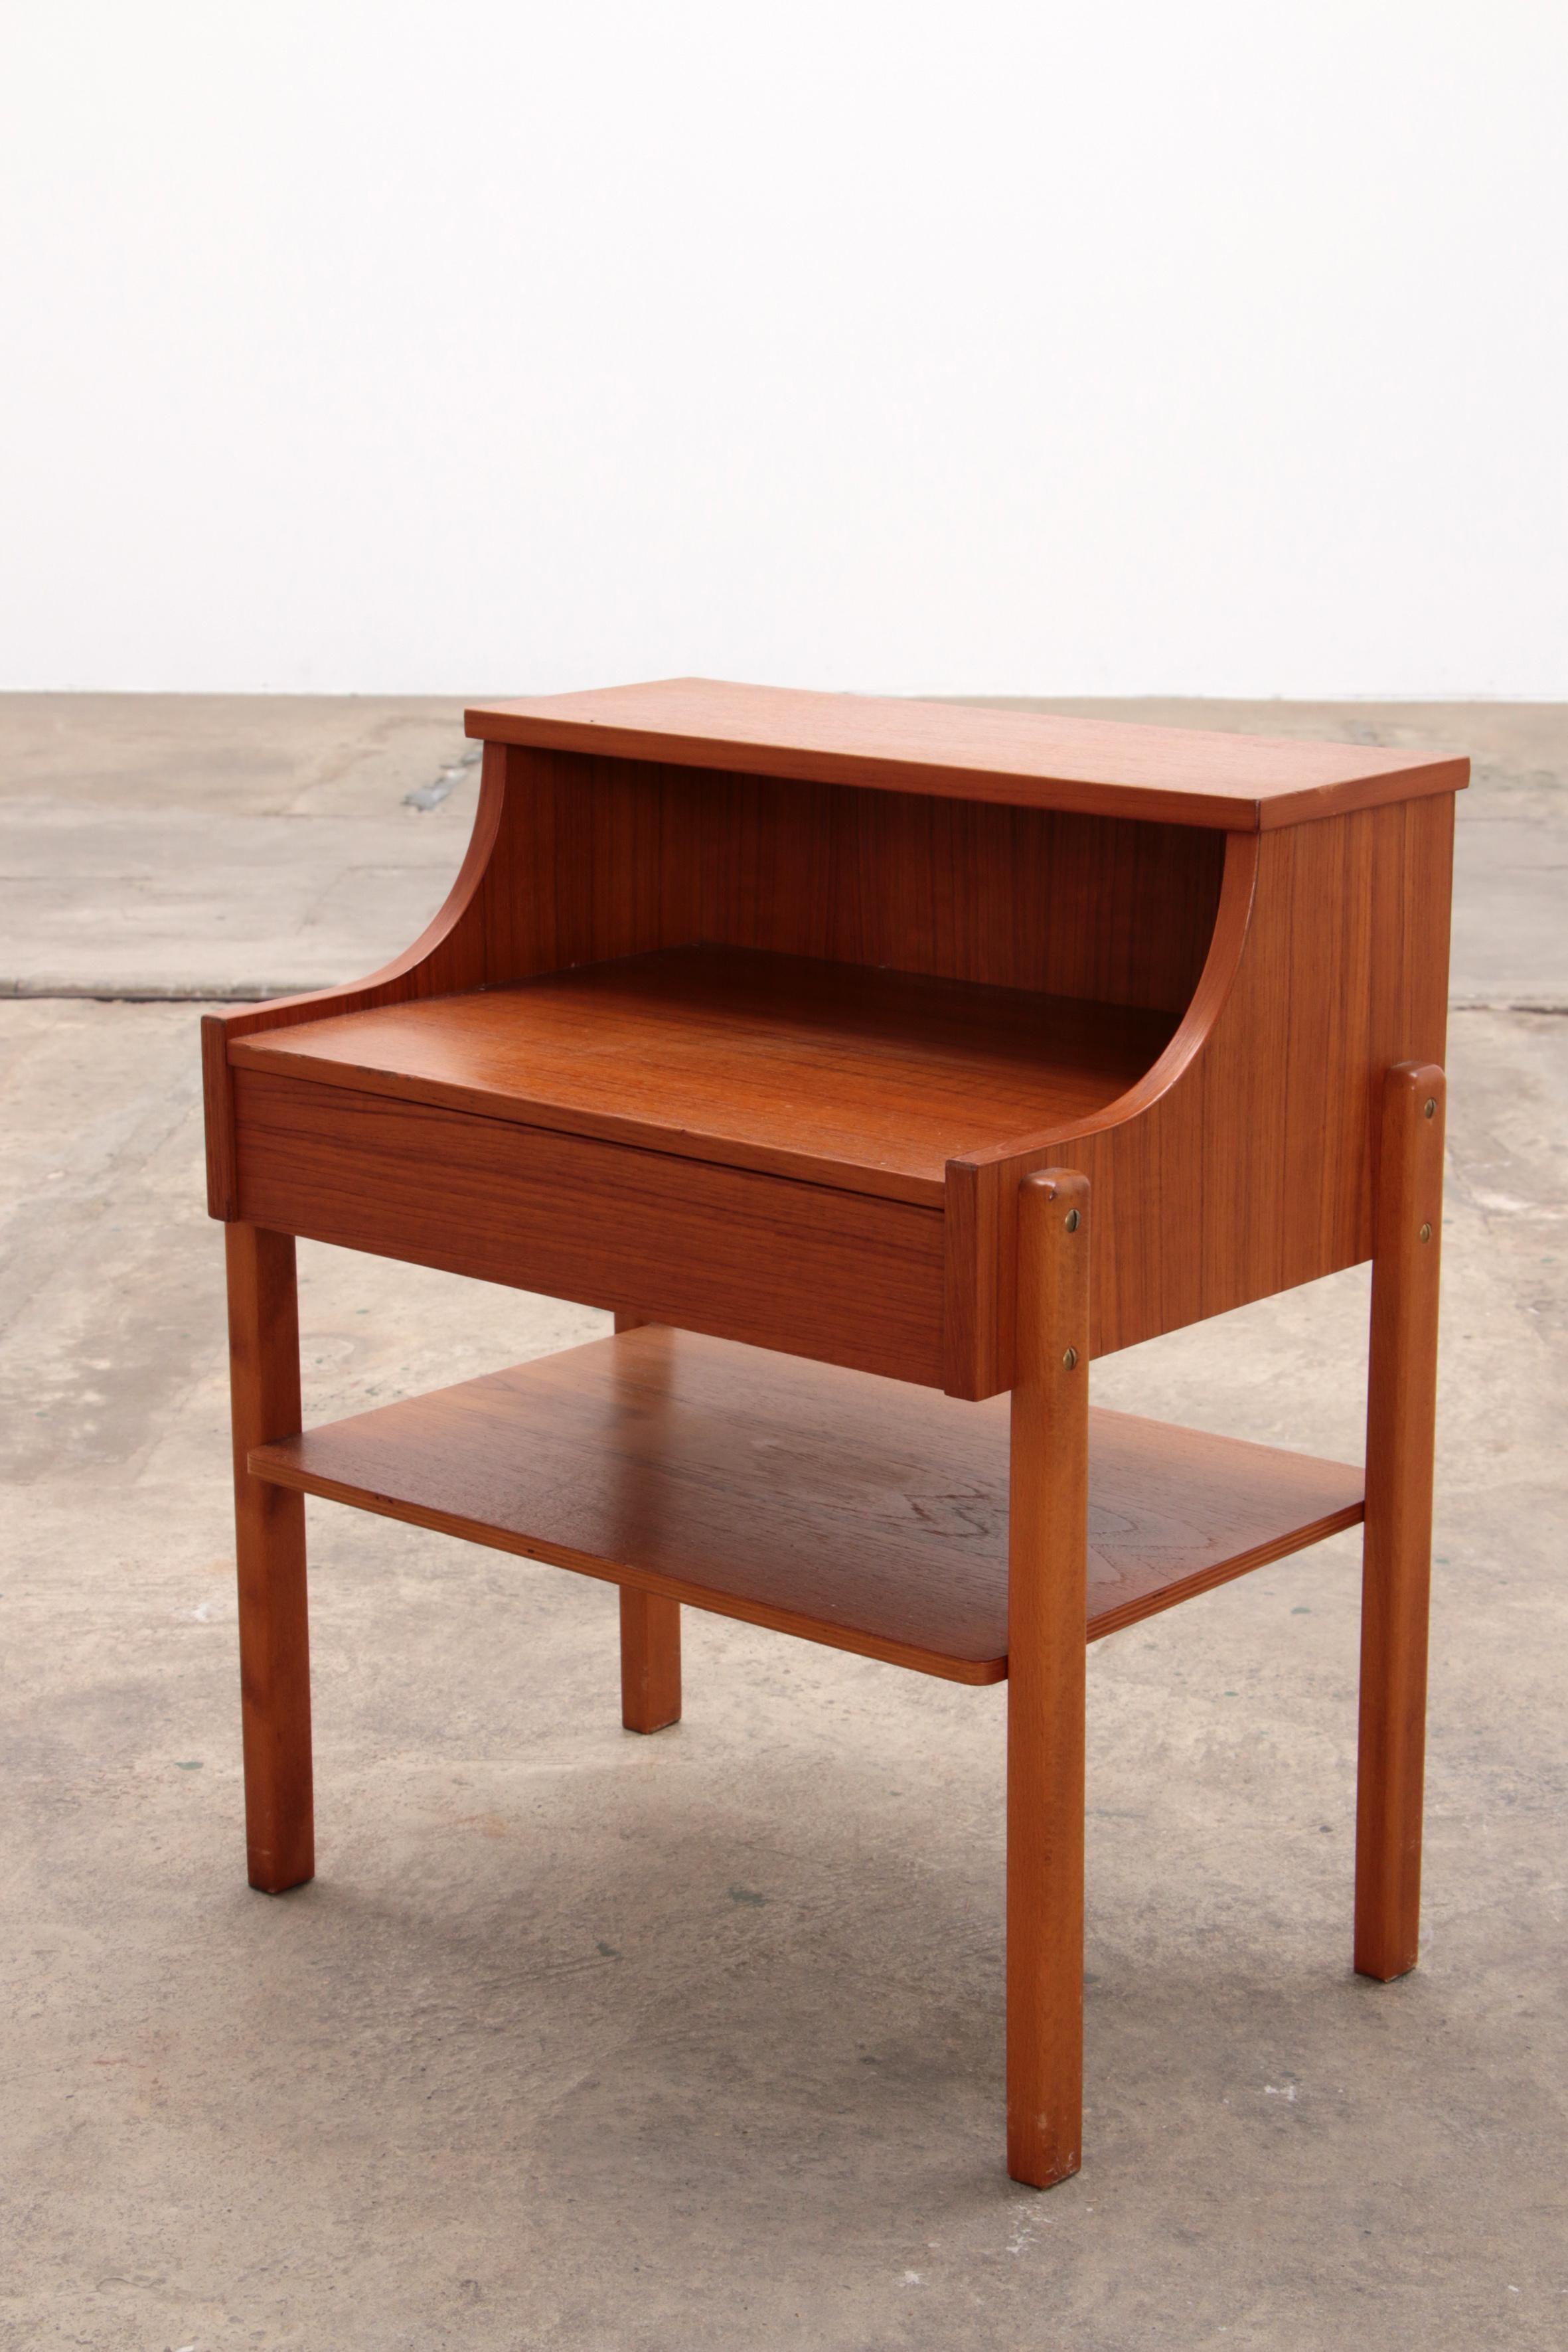 Pair of Scandinavian Bedside Tables in Teak by AB Carlstrom & Co, 1960 For Sale 6